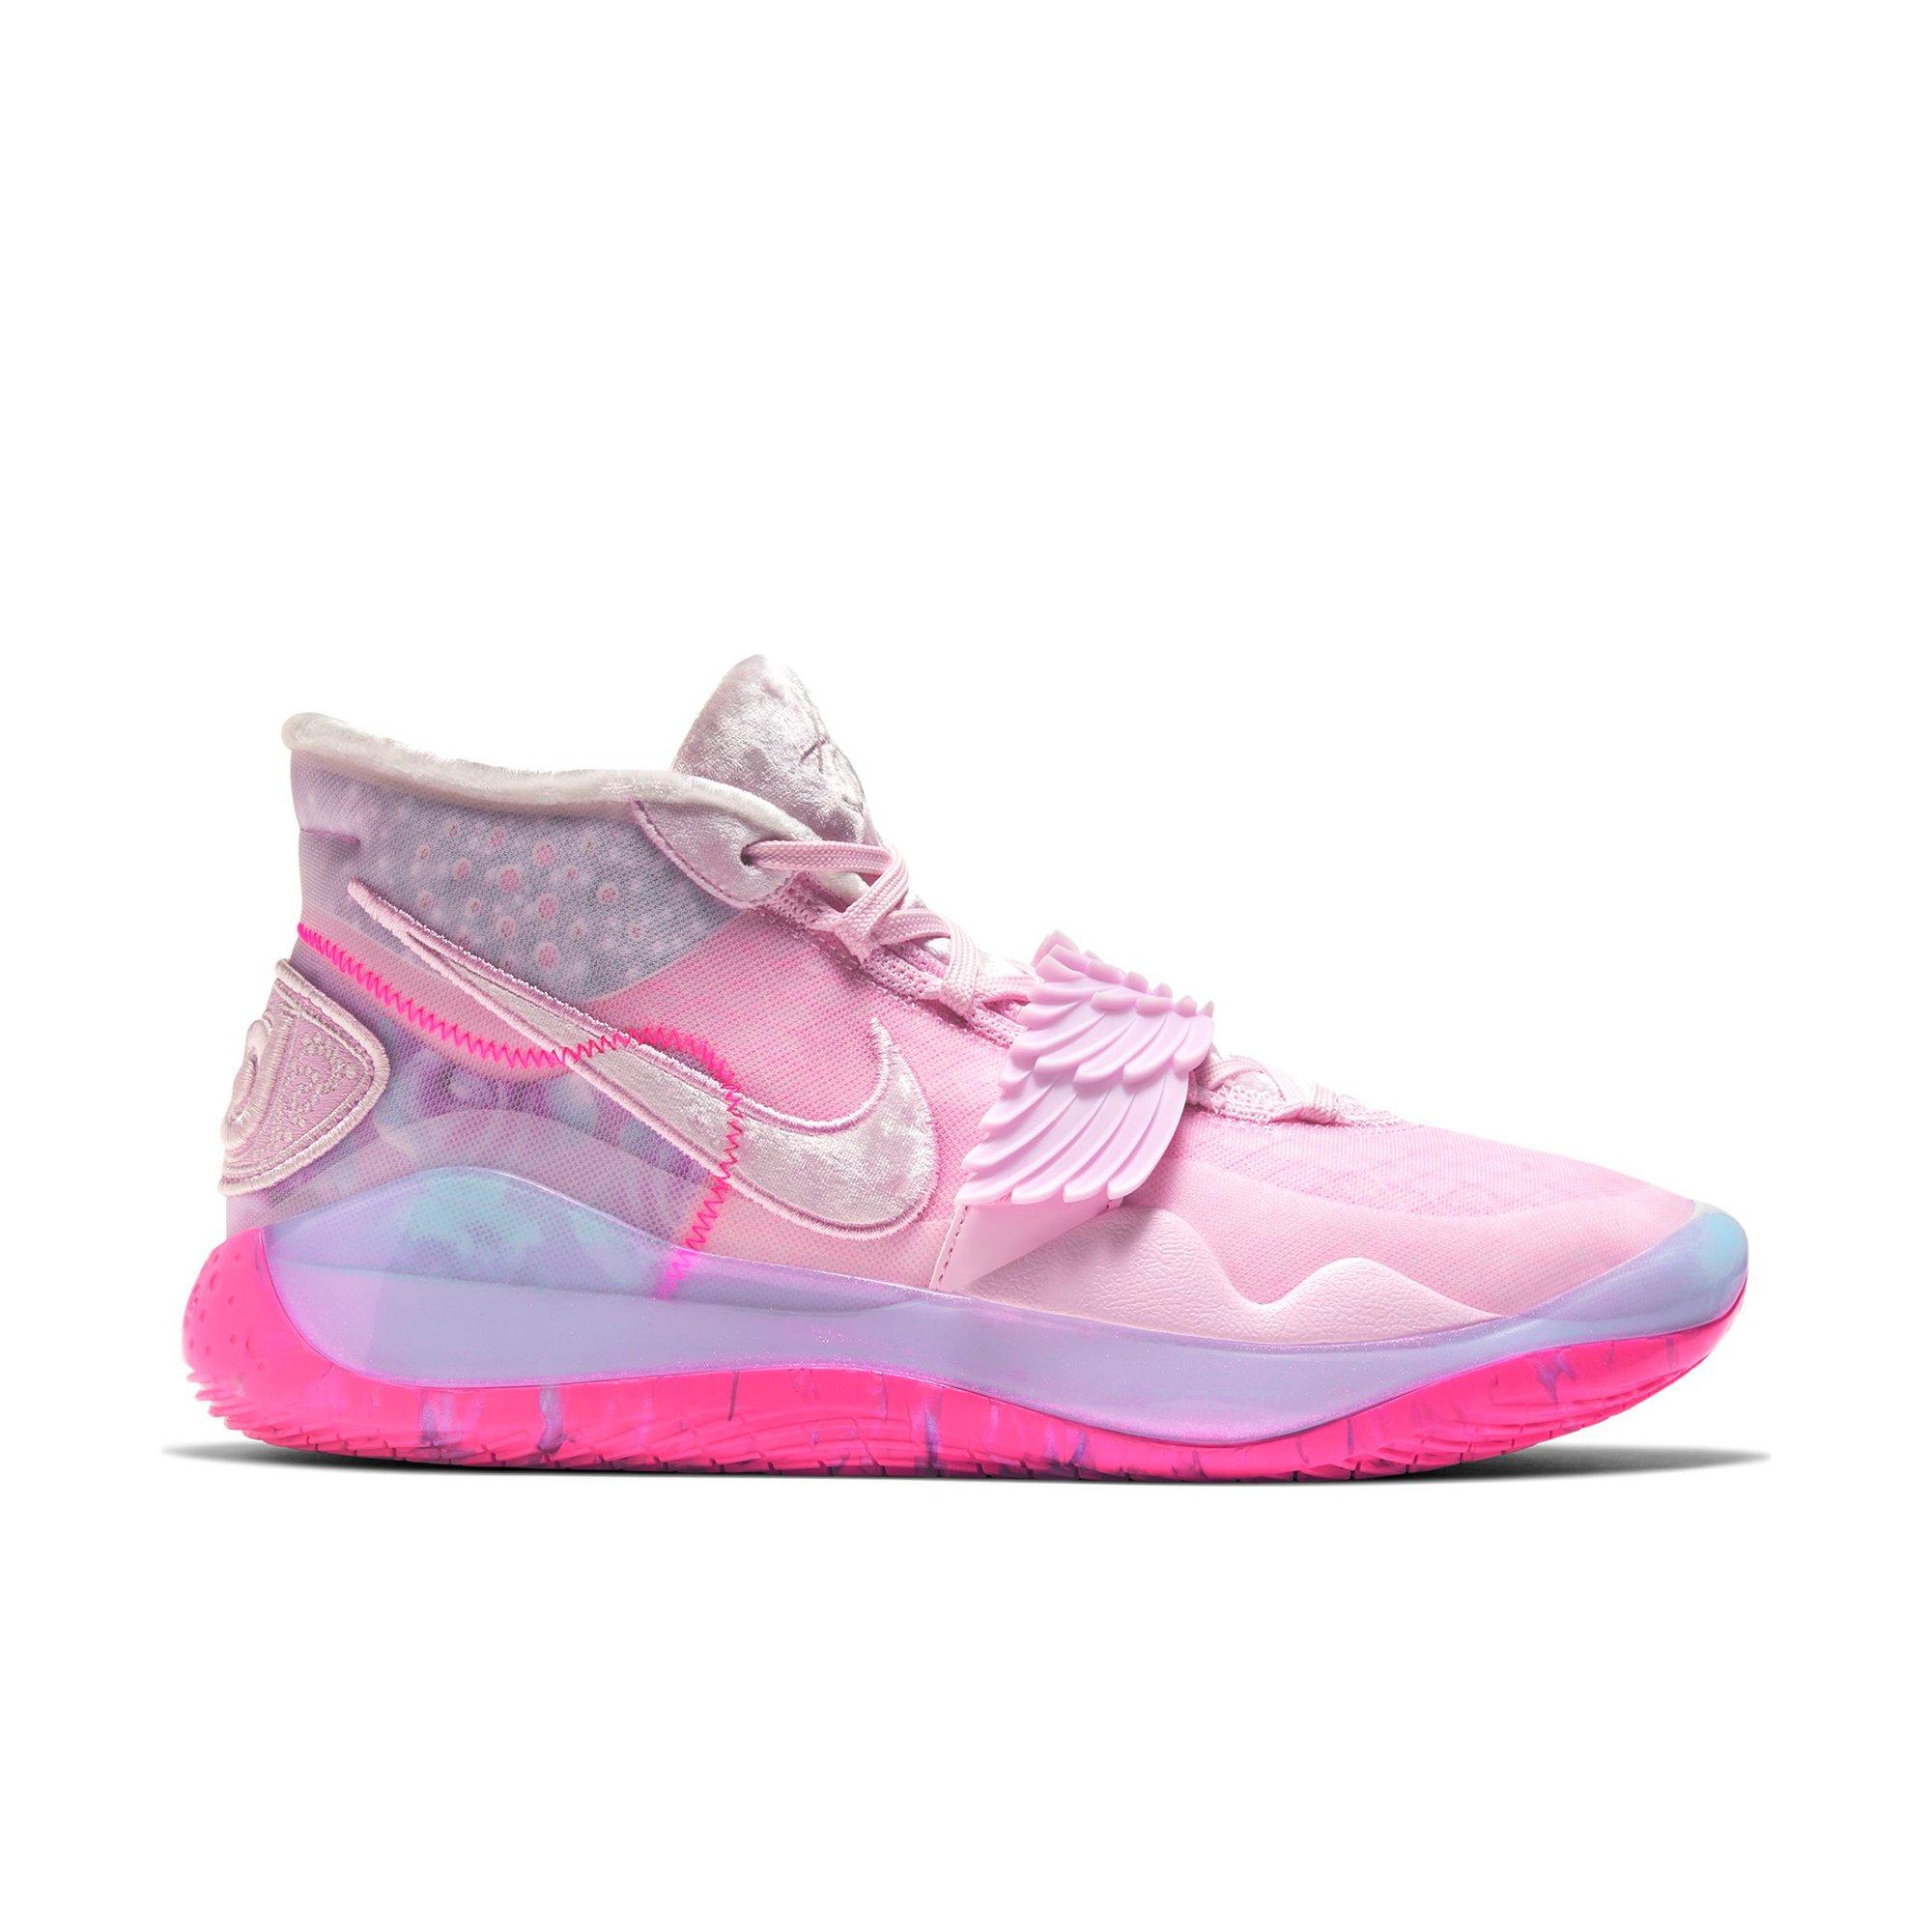 pearl basketball shoes